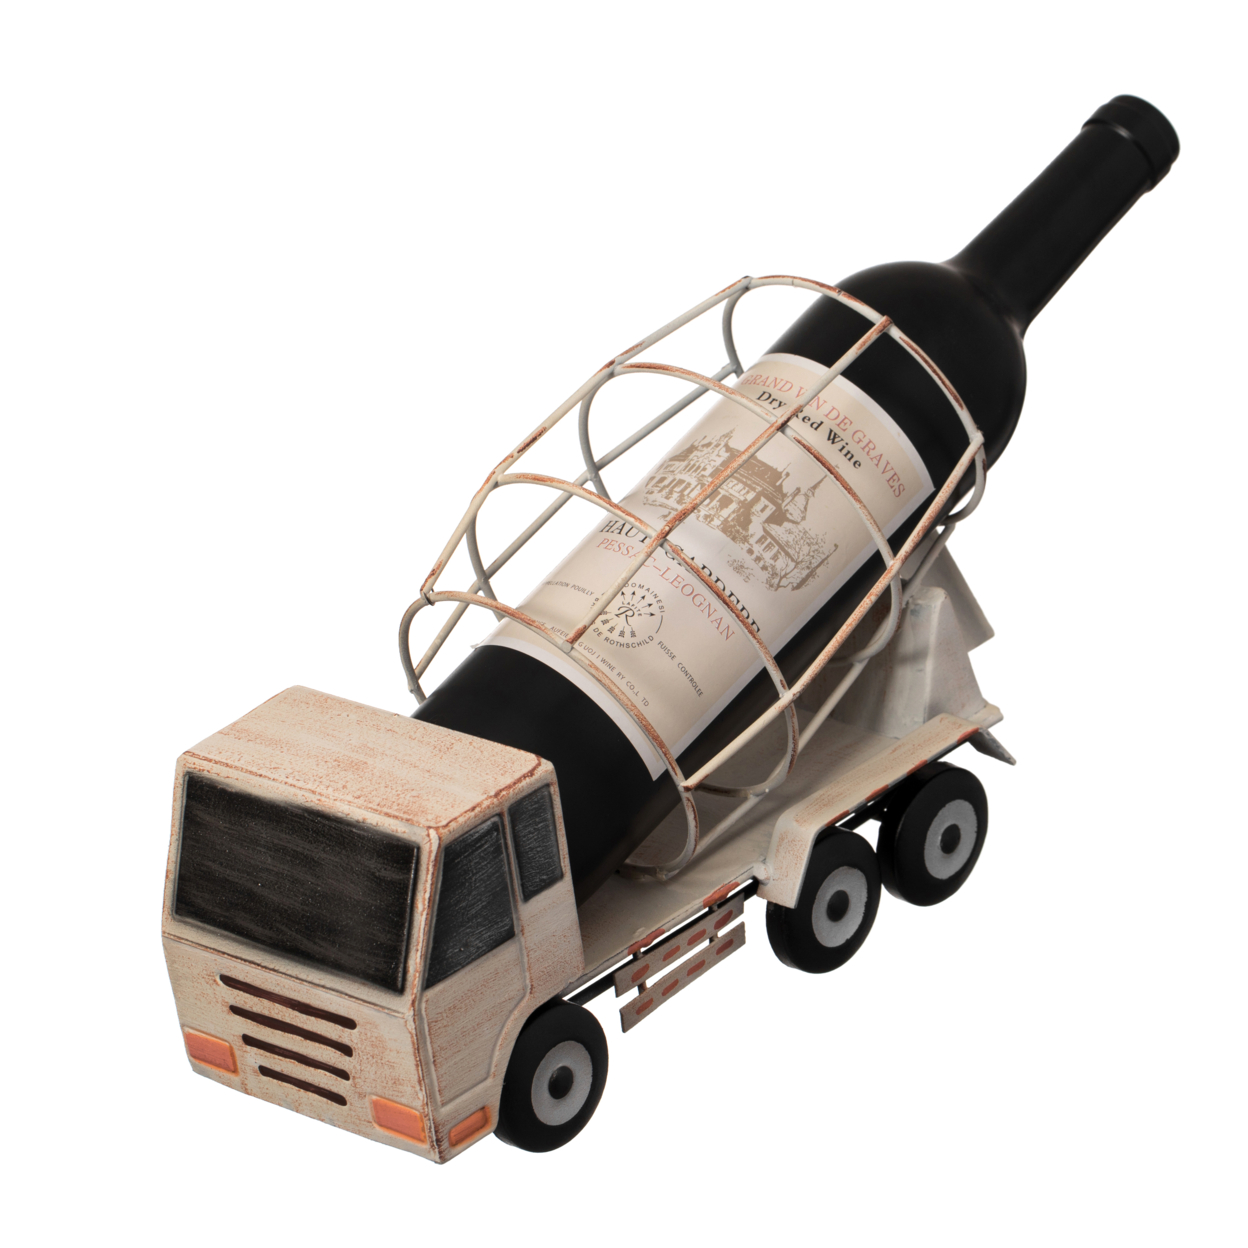 Decorative Rustic Metal White Single Bottle Cement Truck Wine Holder For Tabletop Or Countertop